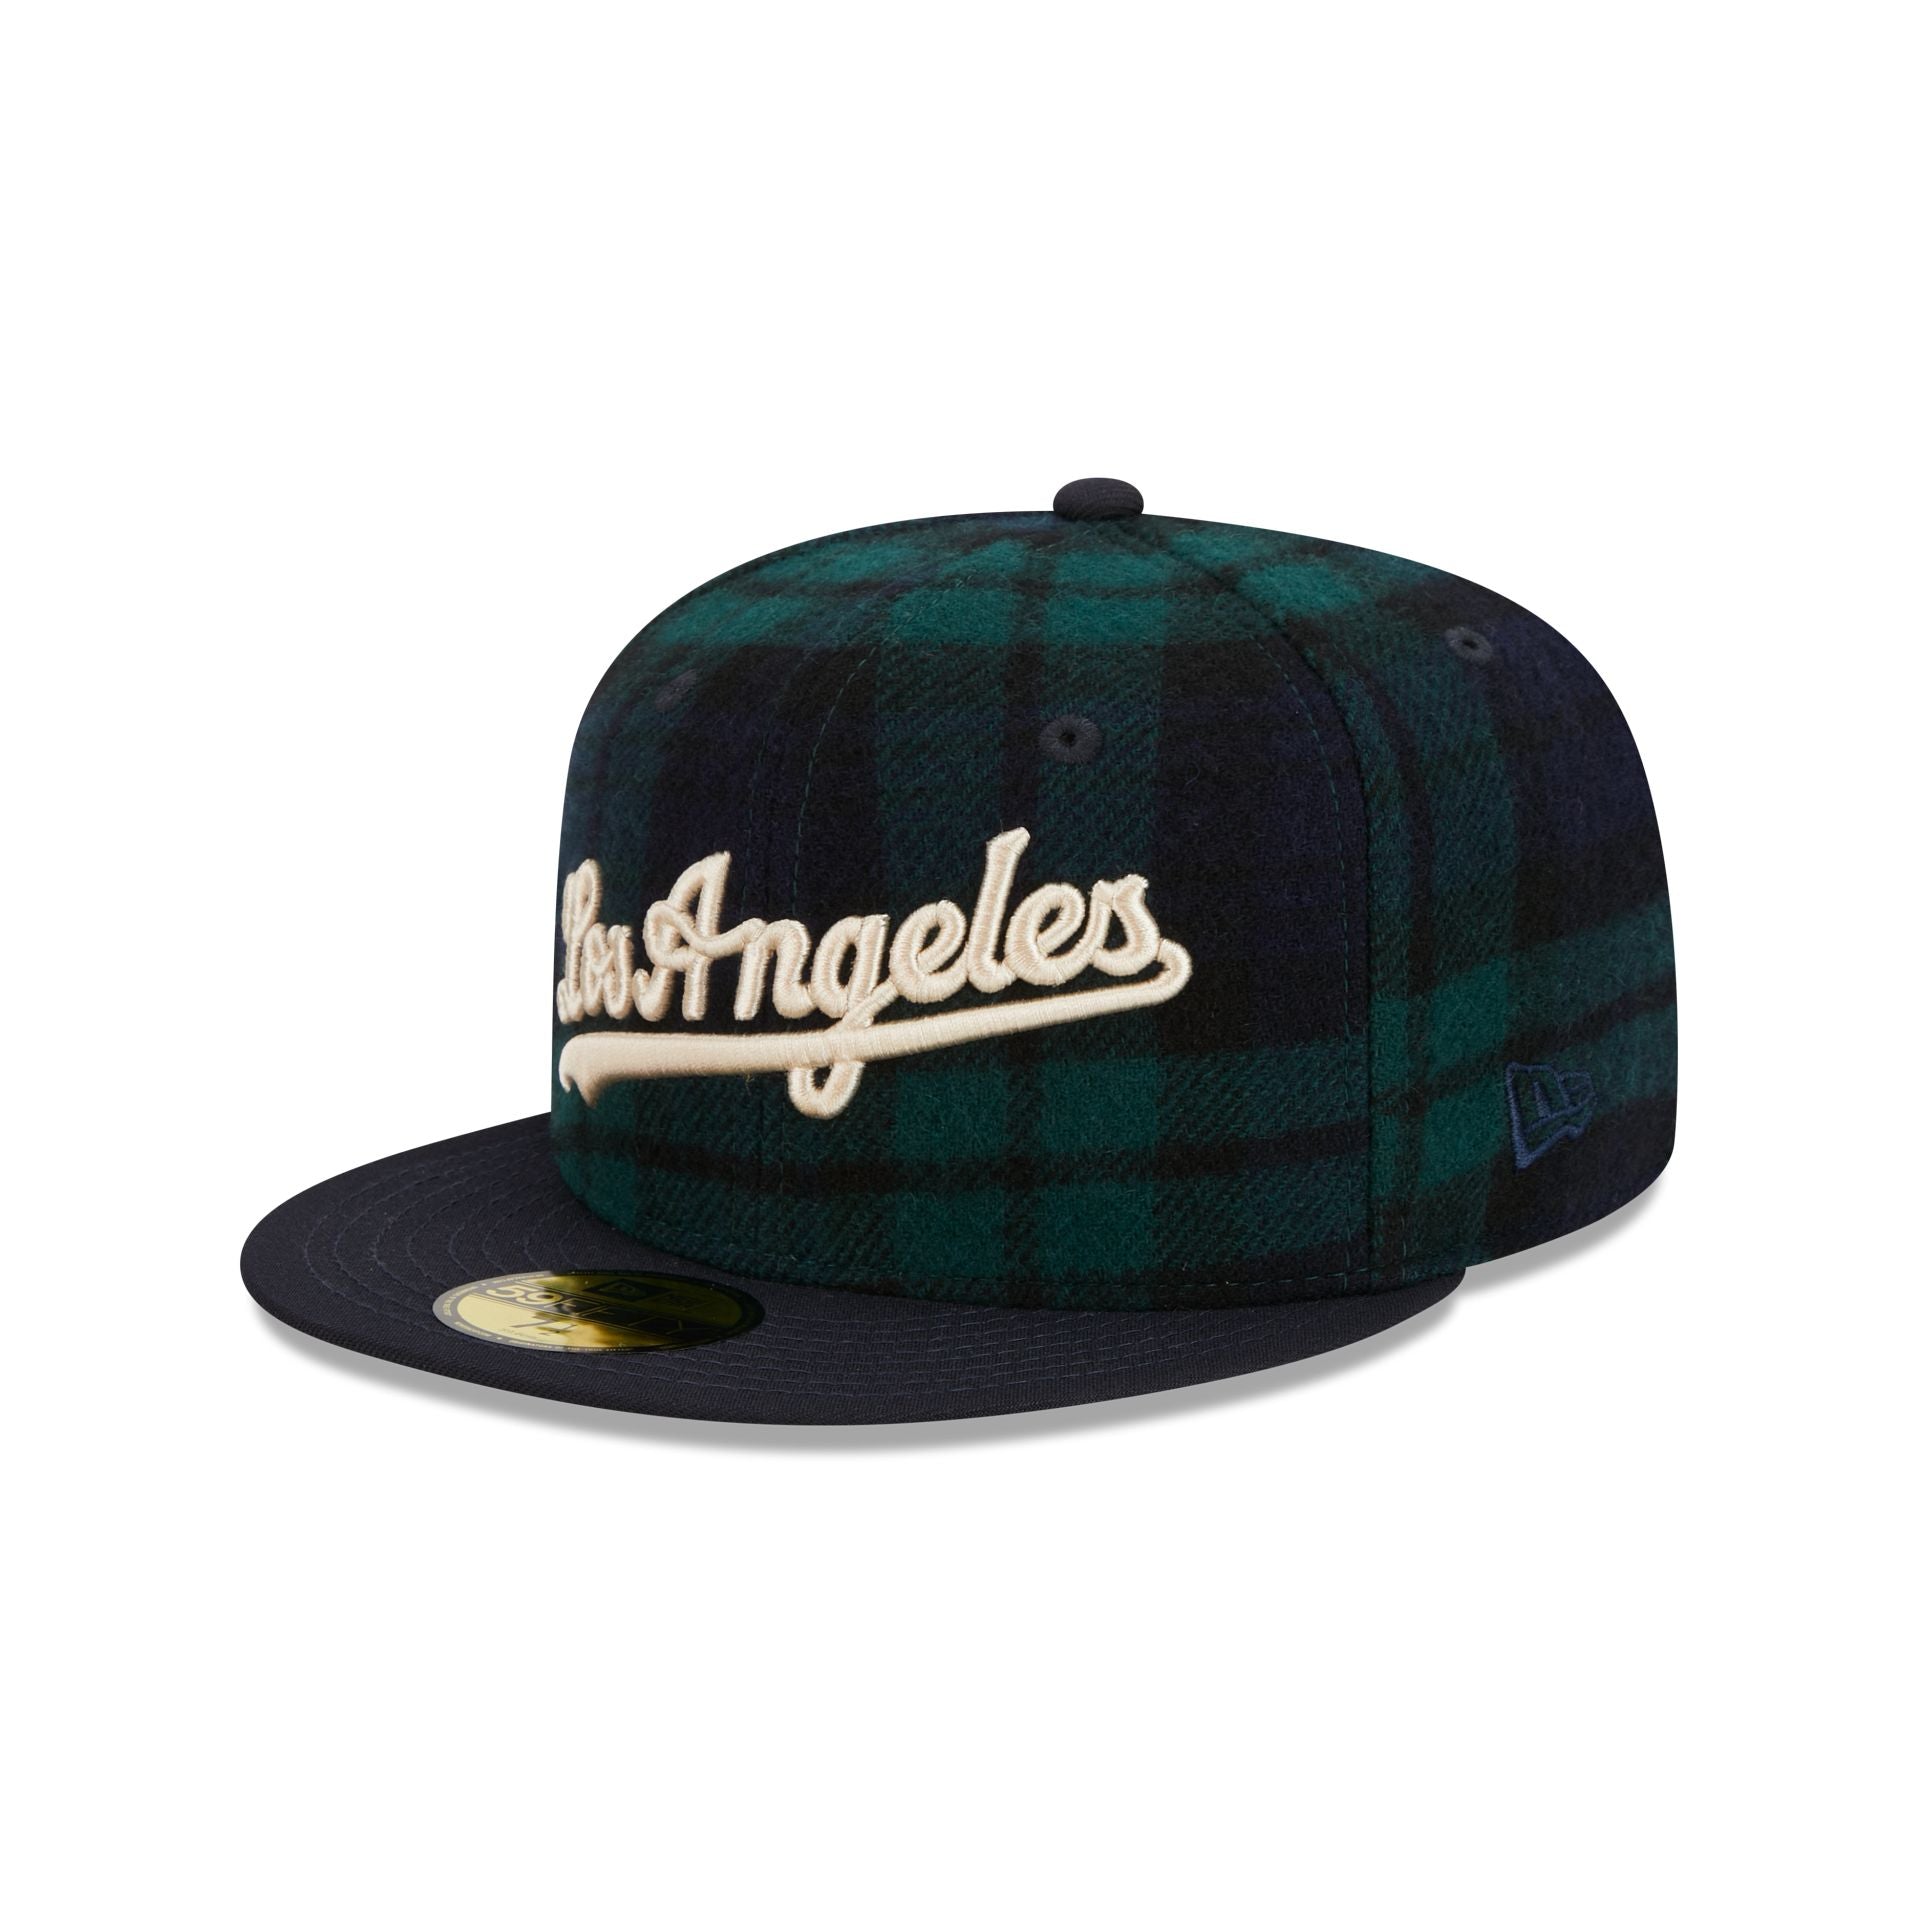 Los Angeles Dodgers Plaid 59FIFTY Fitted Hat - Size: 7, MLB by New Era